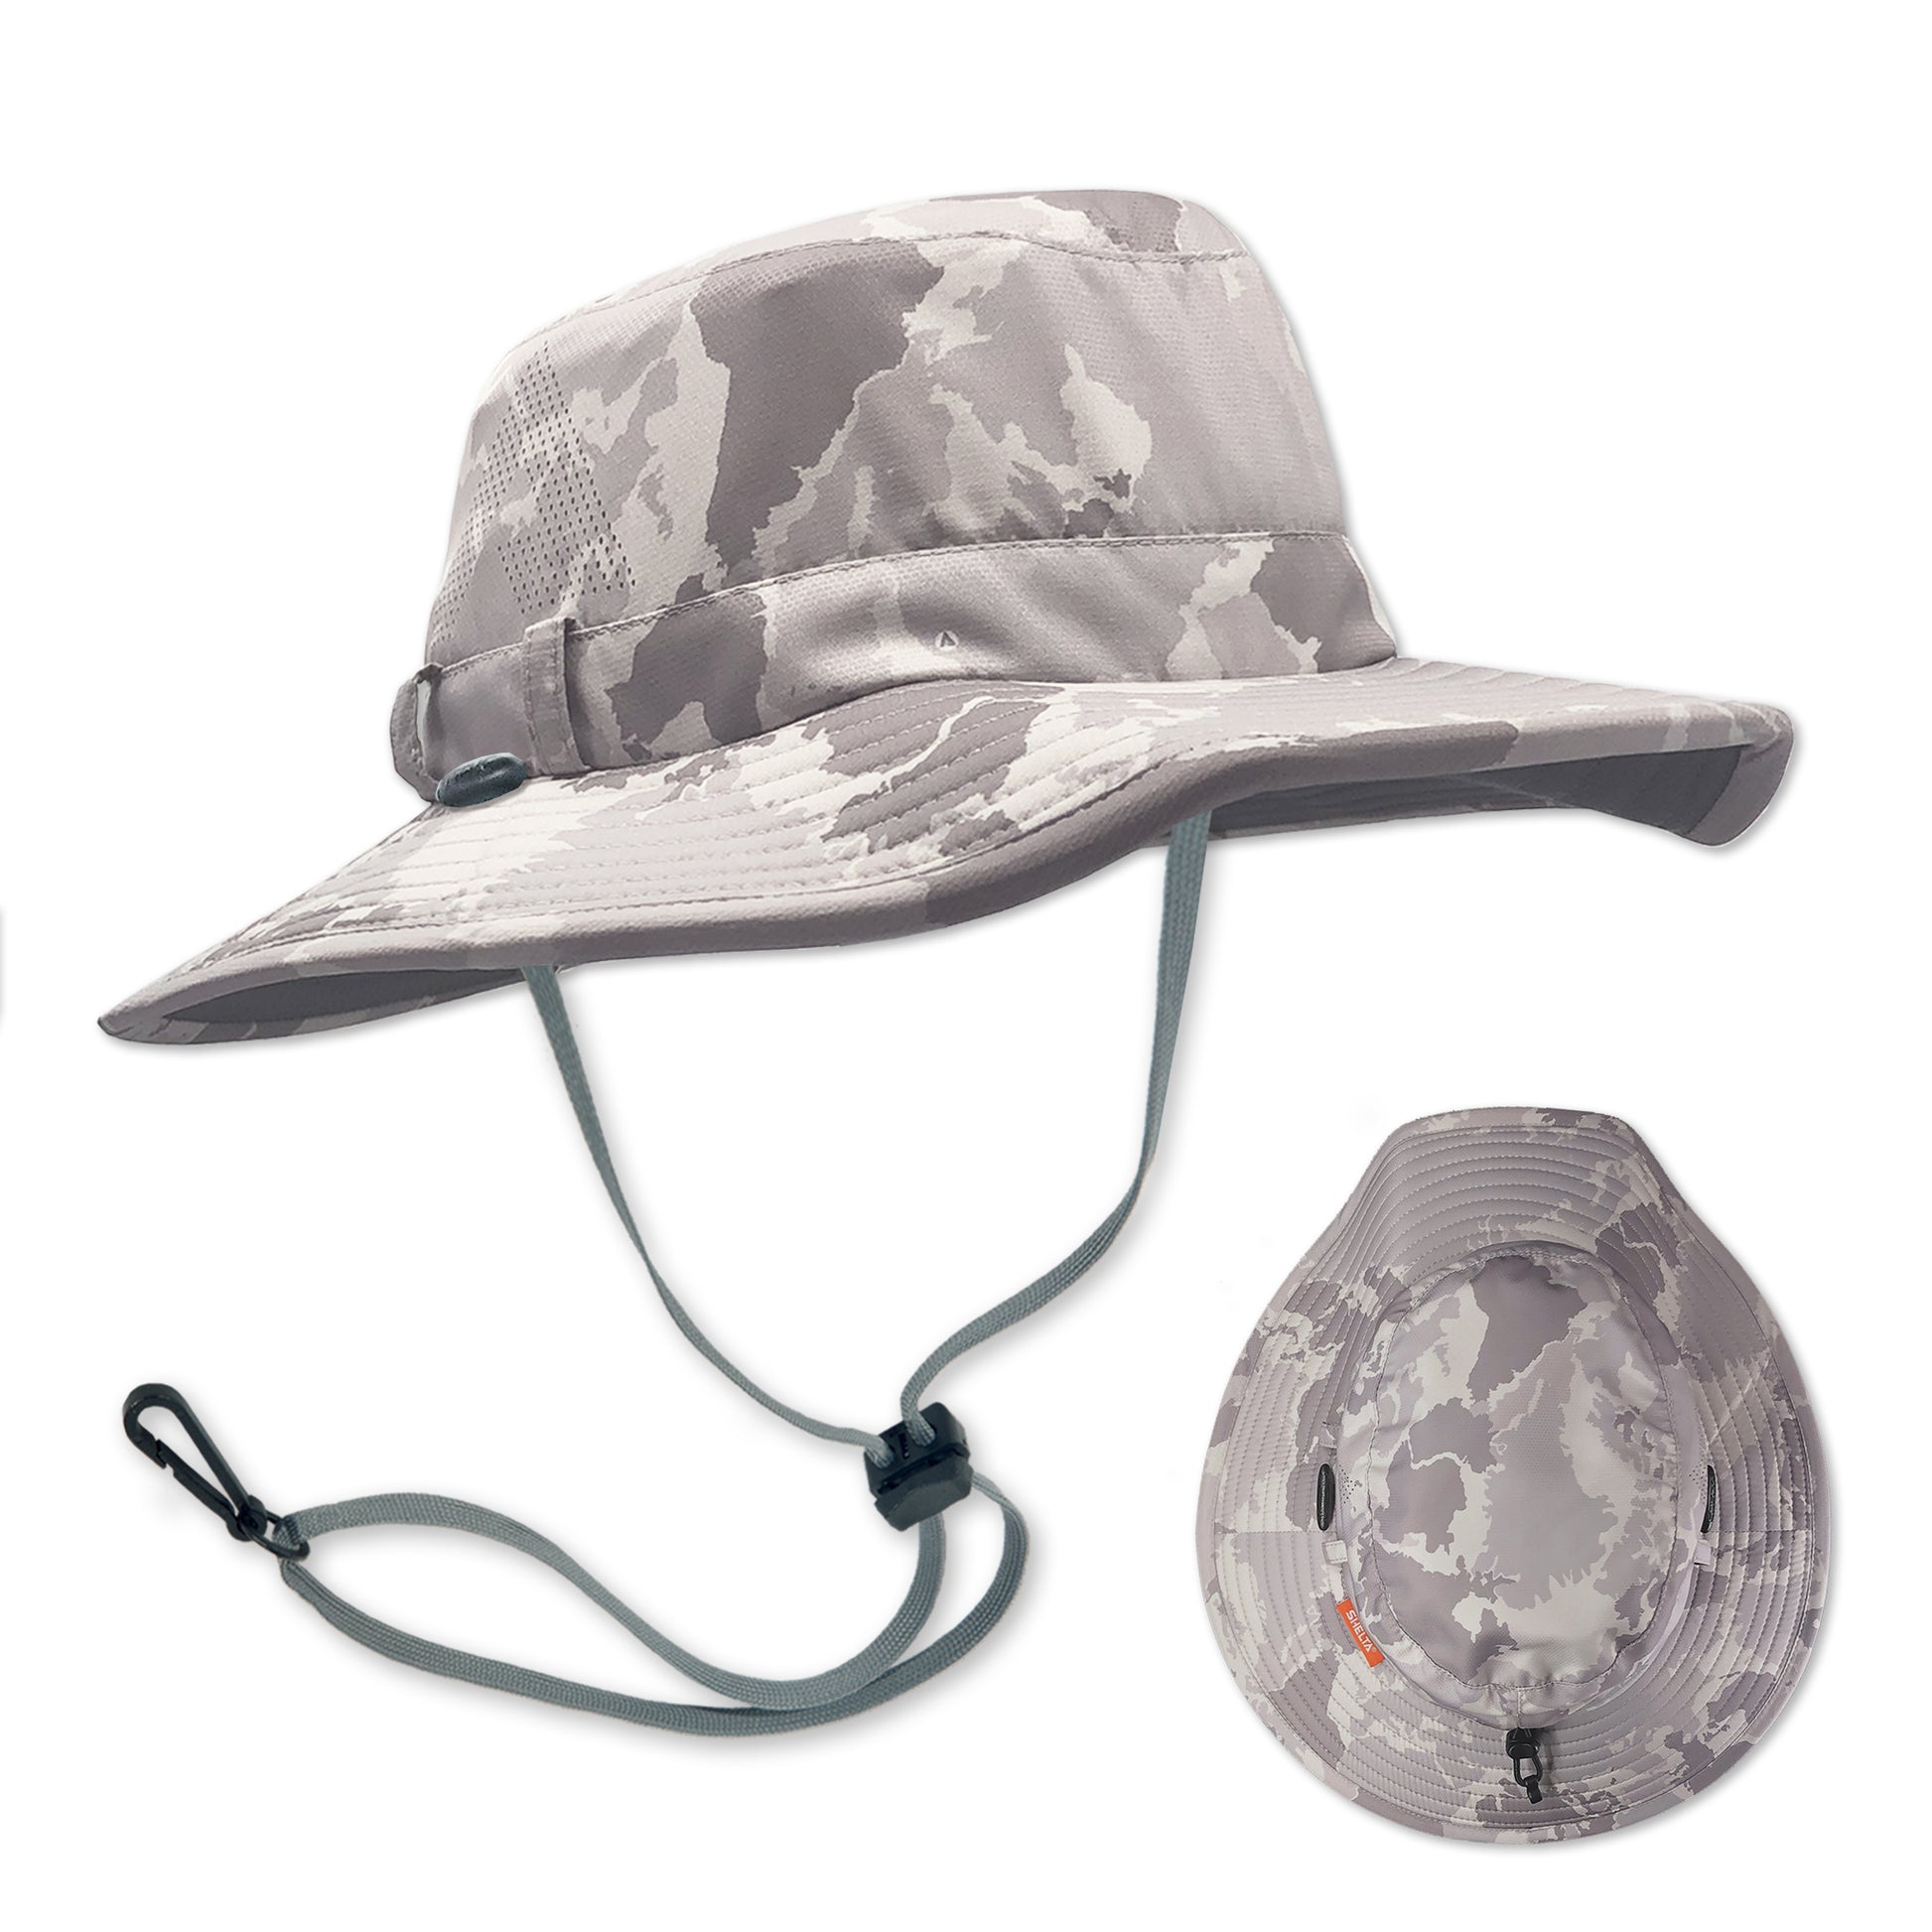 The Condor sun hat in the color SB Camo is a more traditional looking style features a deeper crown for air flow and a wider downward angled brim for more UV protection. A full vapor barrier liner keeps the fabric off of your scalp and allows air to flow through the laser cut venting holes and breathable fabric.. The new Condor does NOT have a stash pocket. This was done to make the hat lighter.